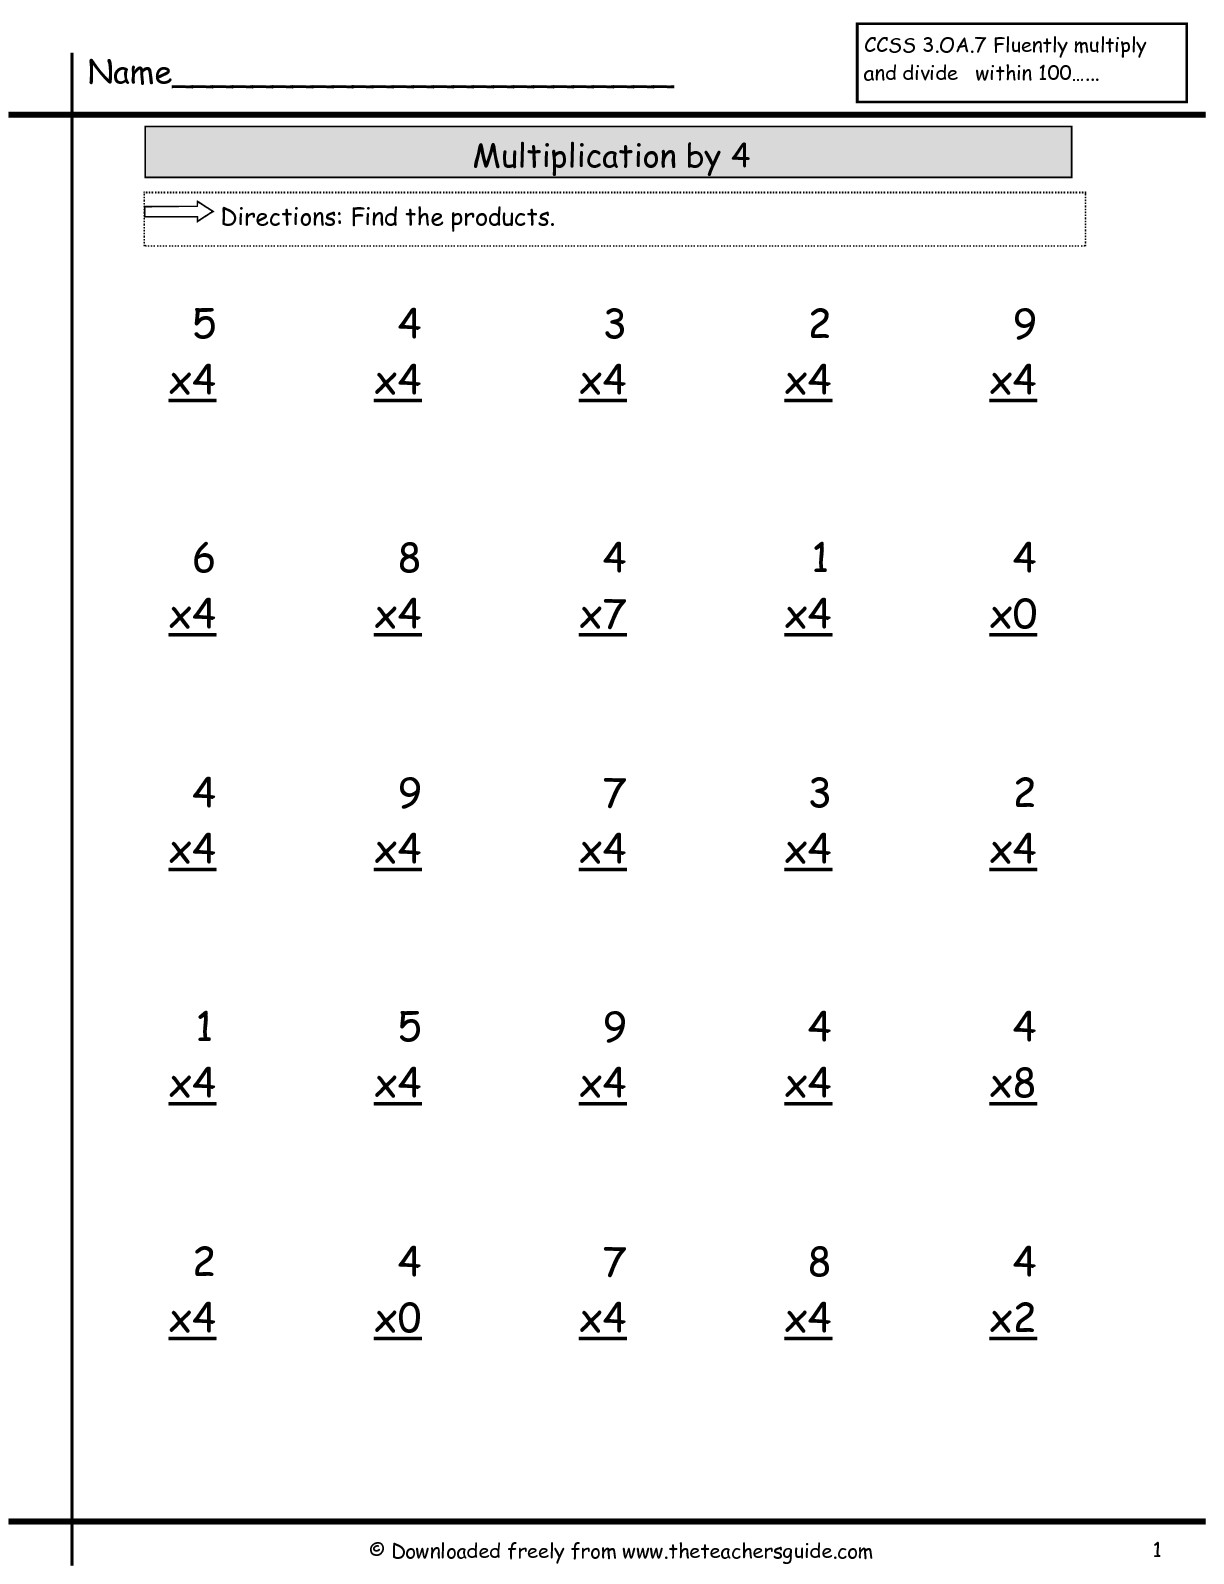 13-best-images-of-worksheets-counting-to-12-number-worksheets-0-20-4-multiplication-facts